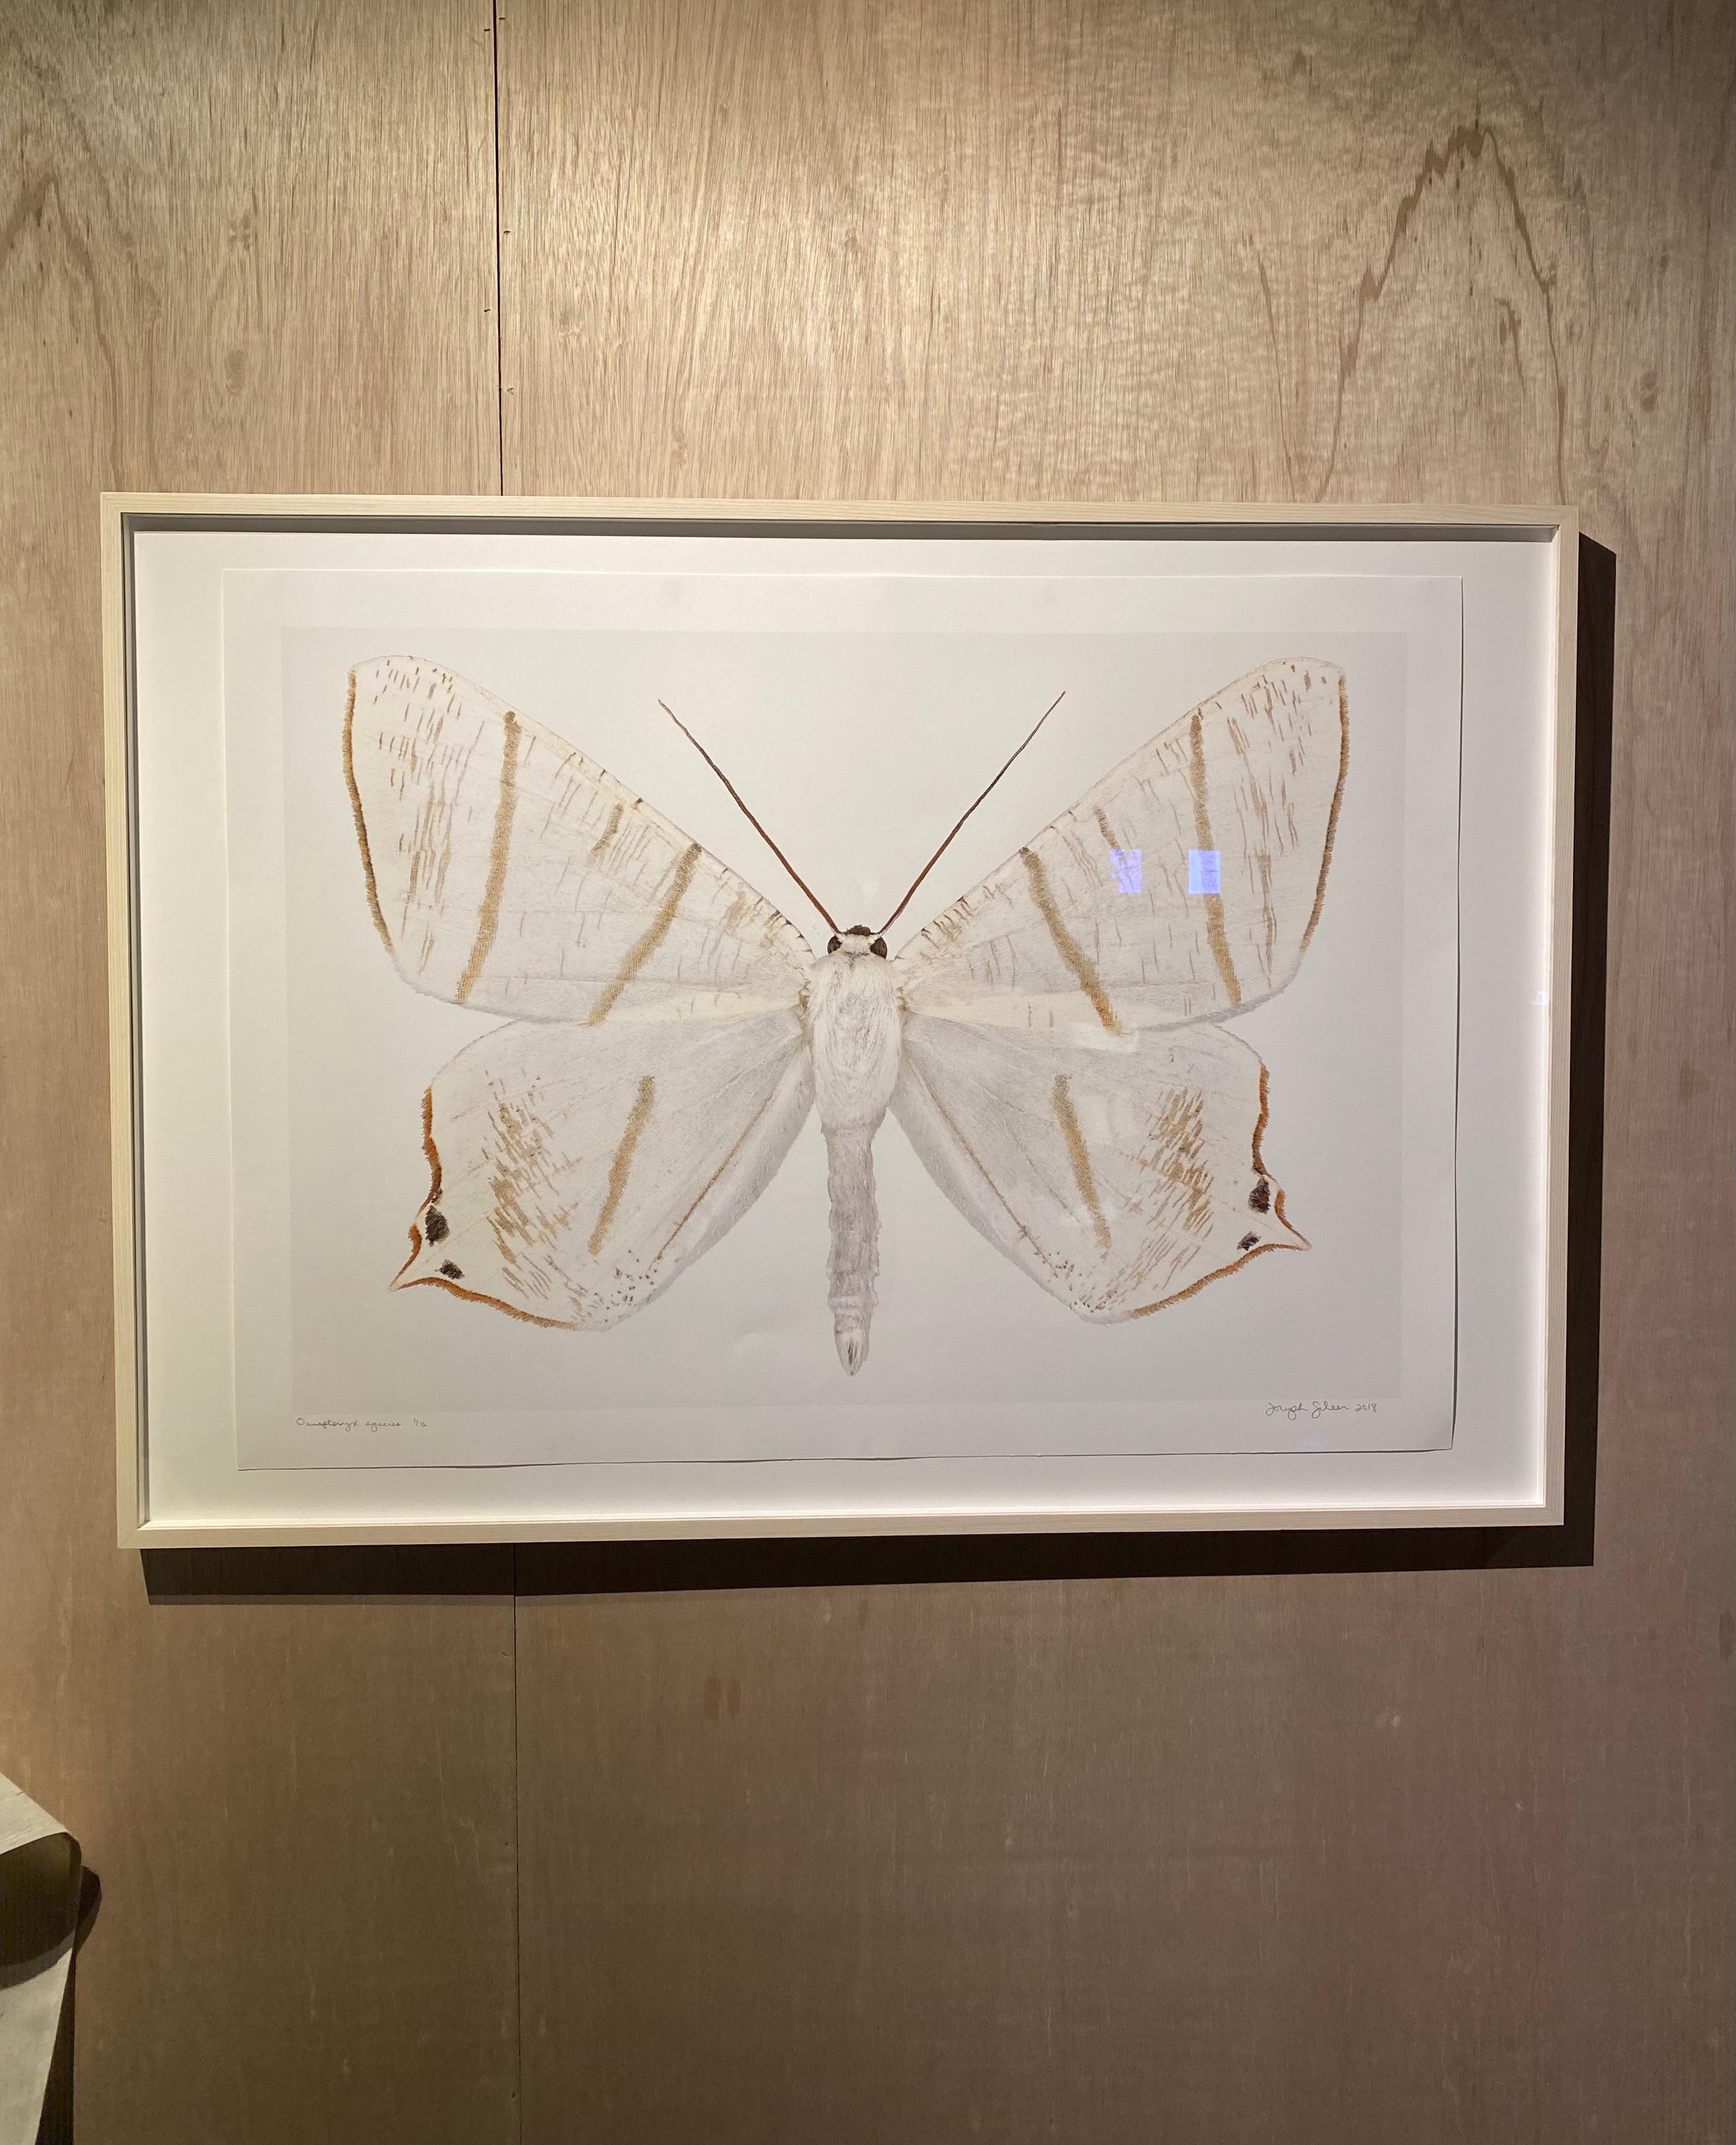 In this hyper-detailed archival pigment print on watercolor paper, a white moth with brown circular markings at the tips its bottom wings, and light, golden brown stripes is dramatic against a solid white background. 

Signed and numbered on recto.